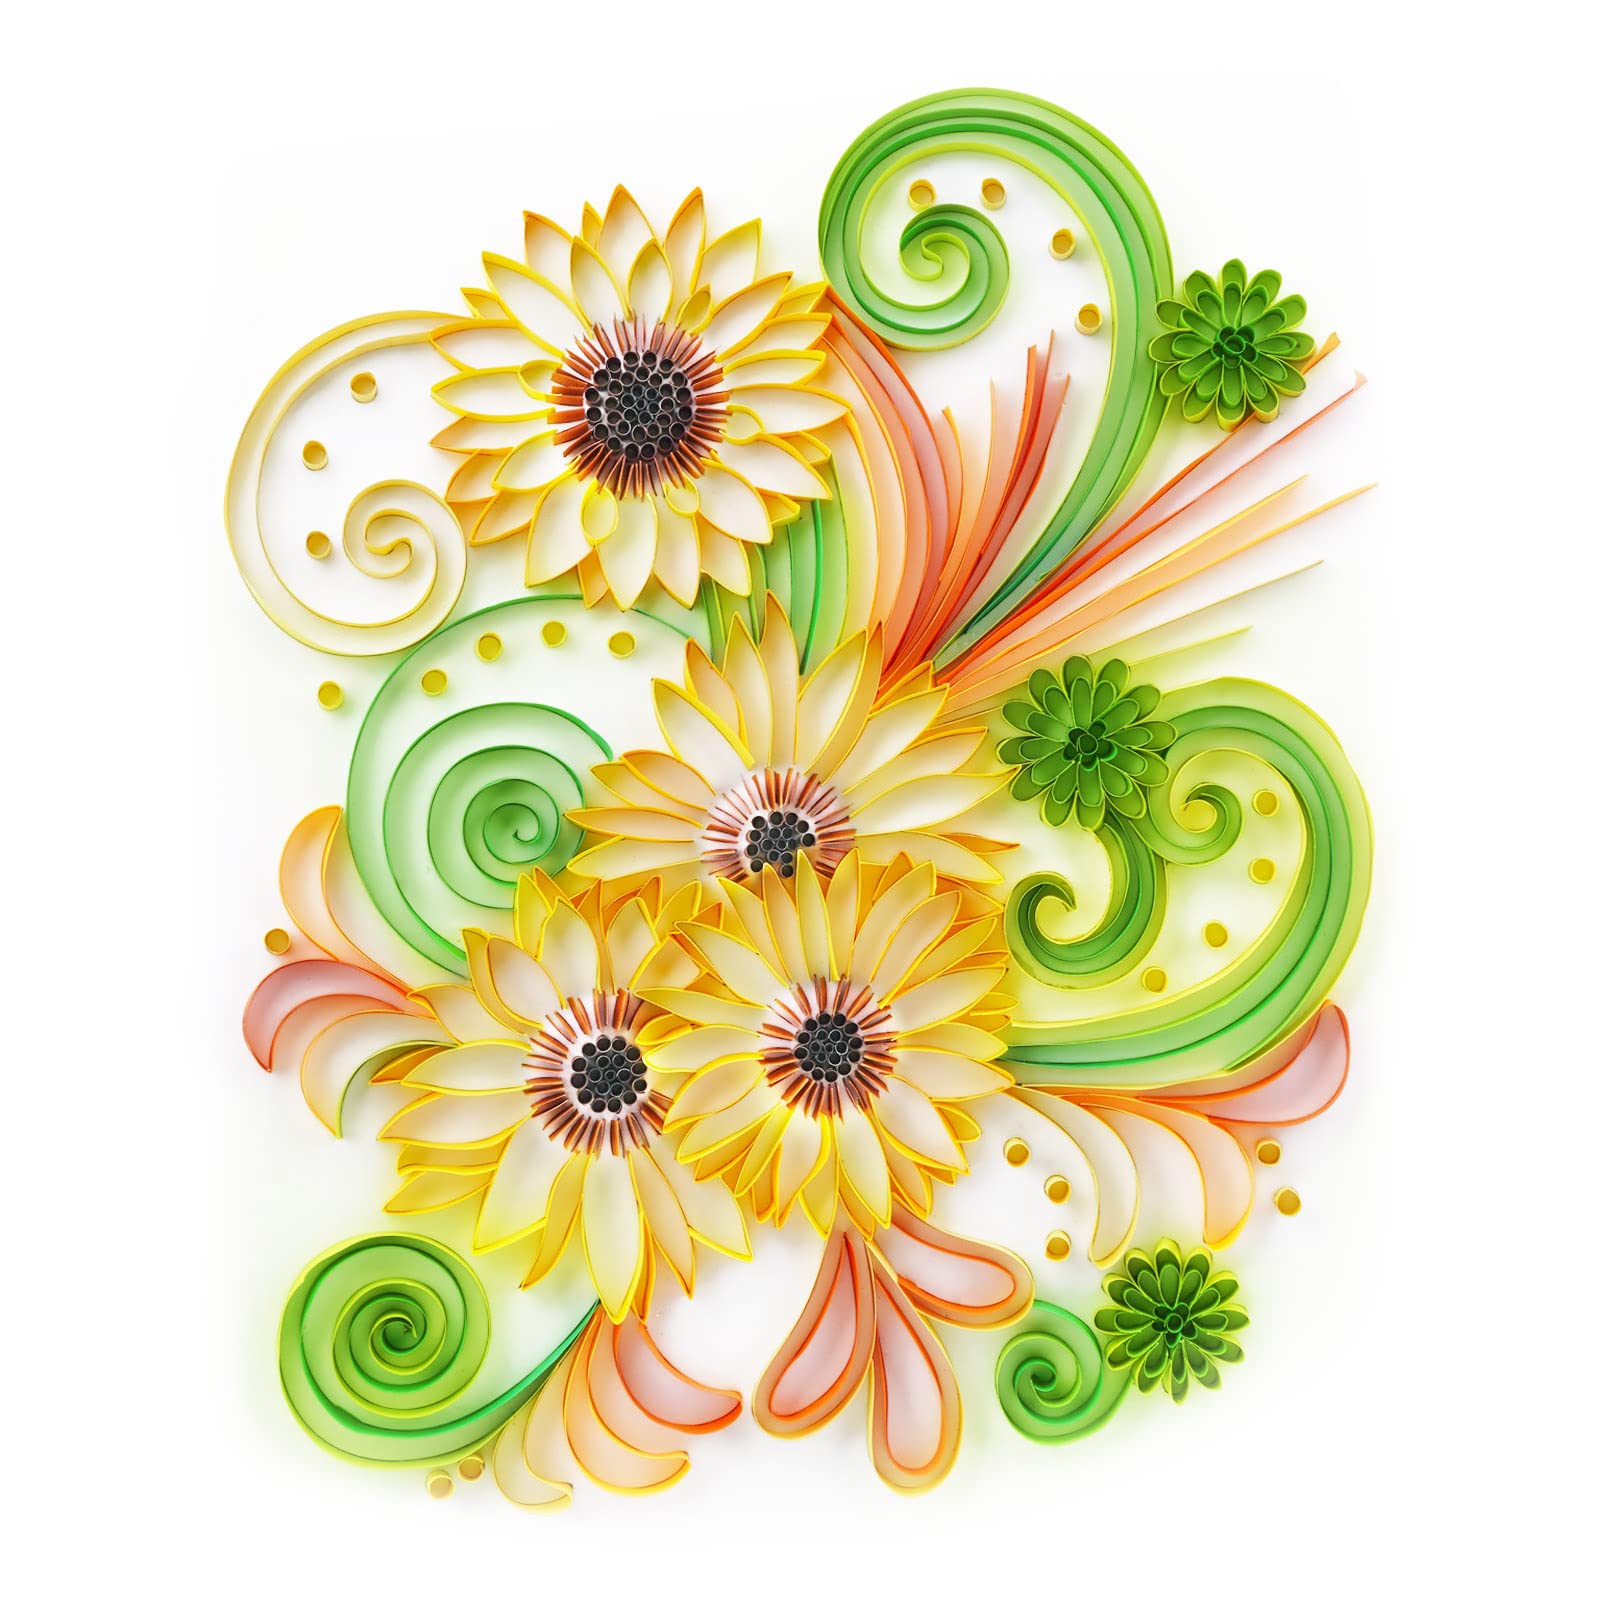 Uniquilling Quilling Paper Quilling Kit for Adults Beginner 16